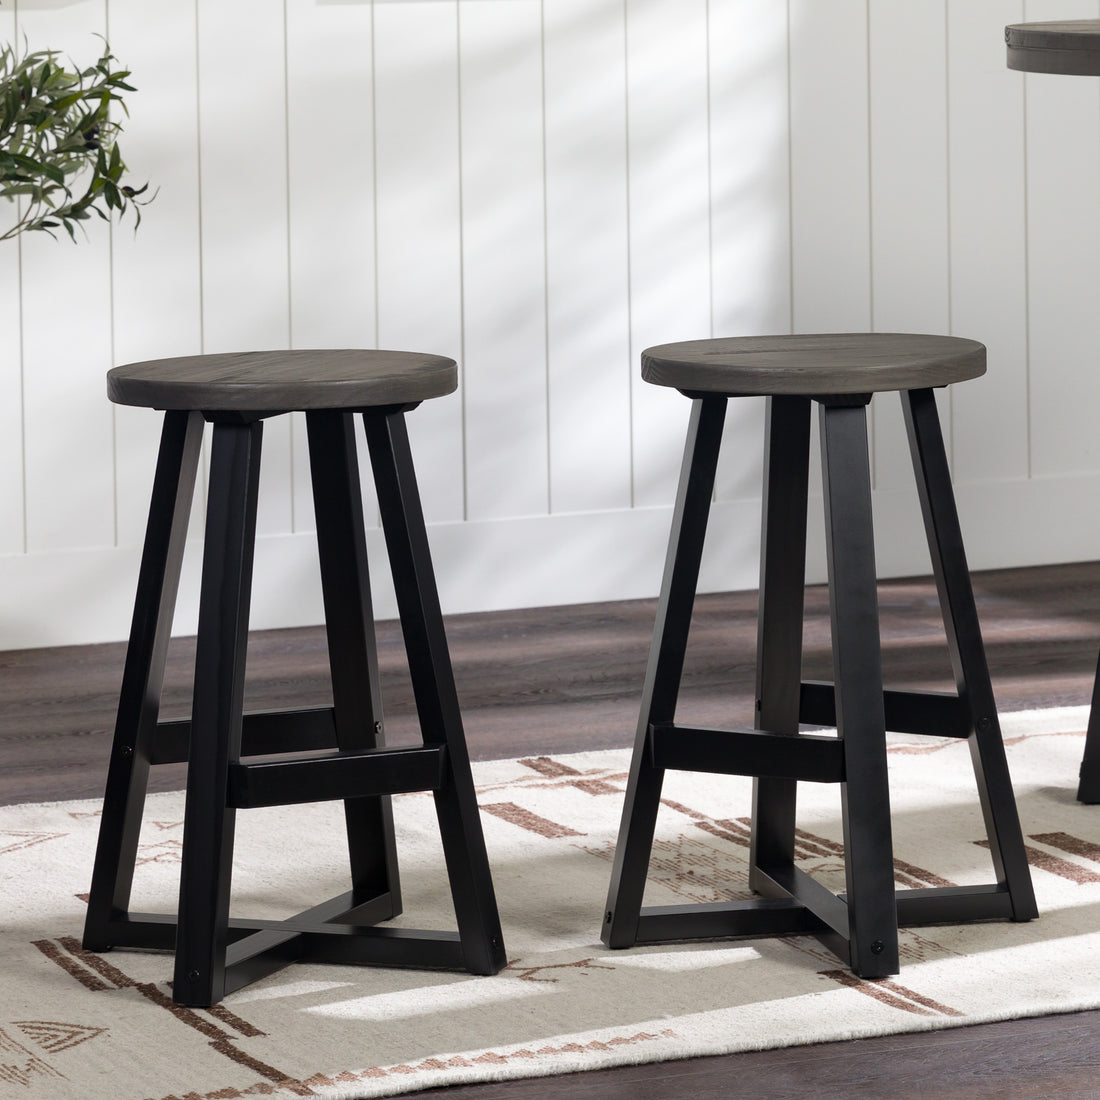 Rustic Distressed Solid Wood Round Dining Stool